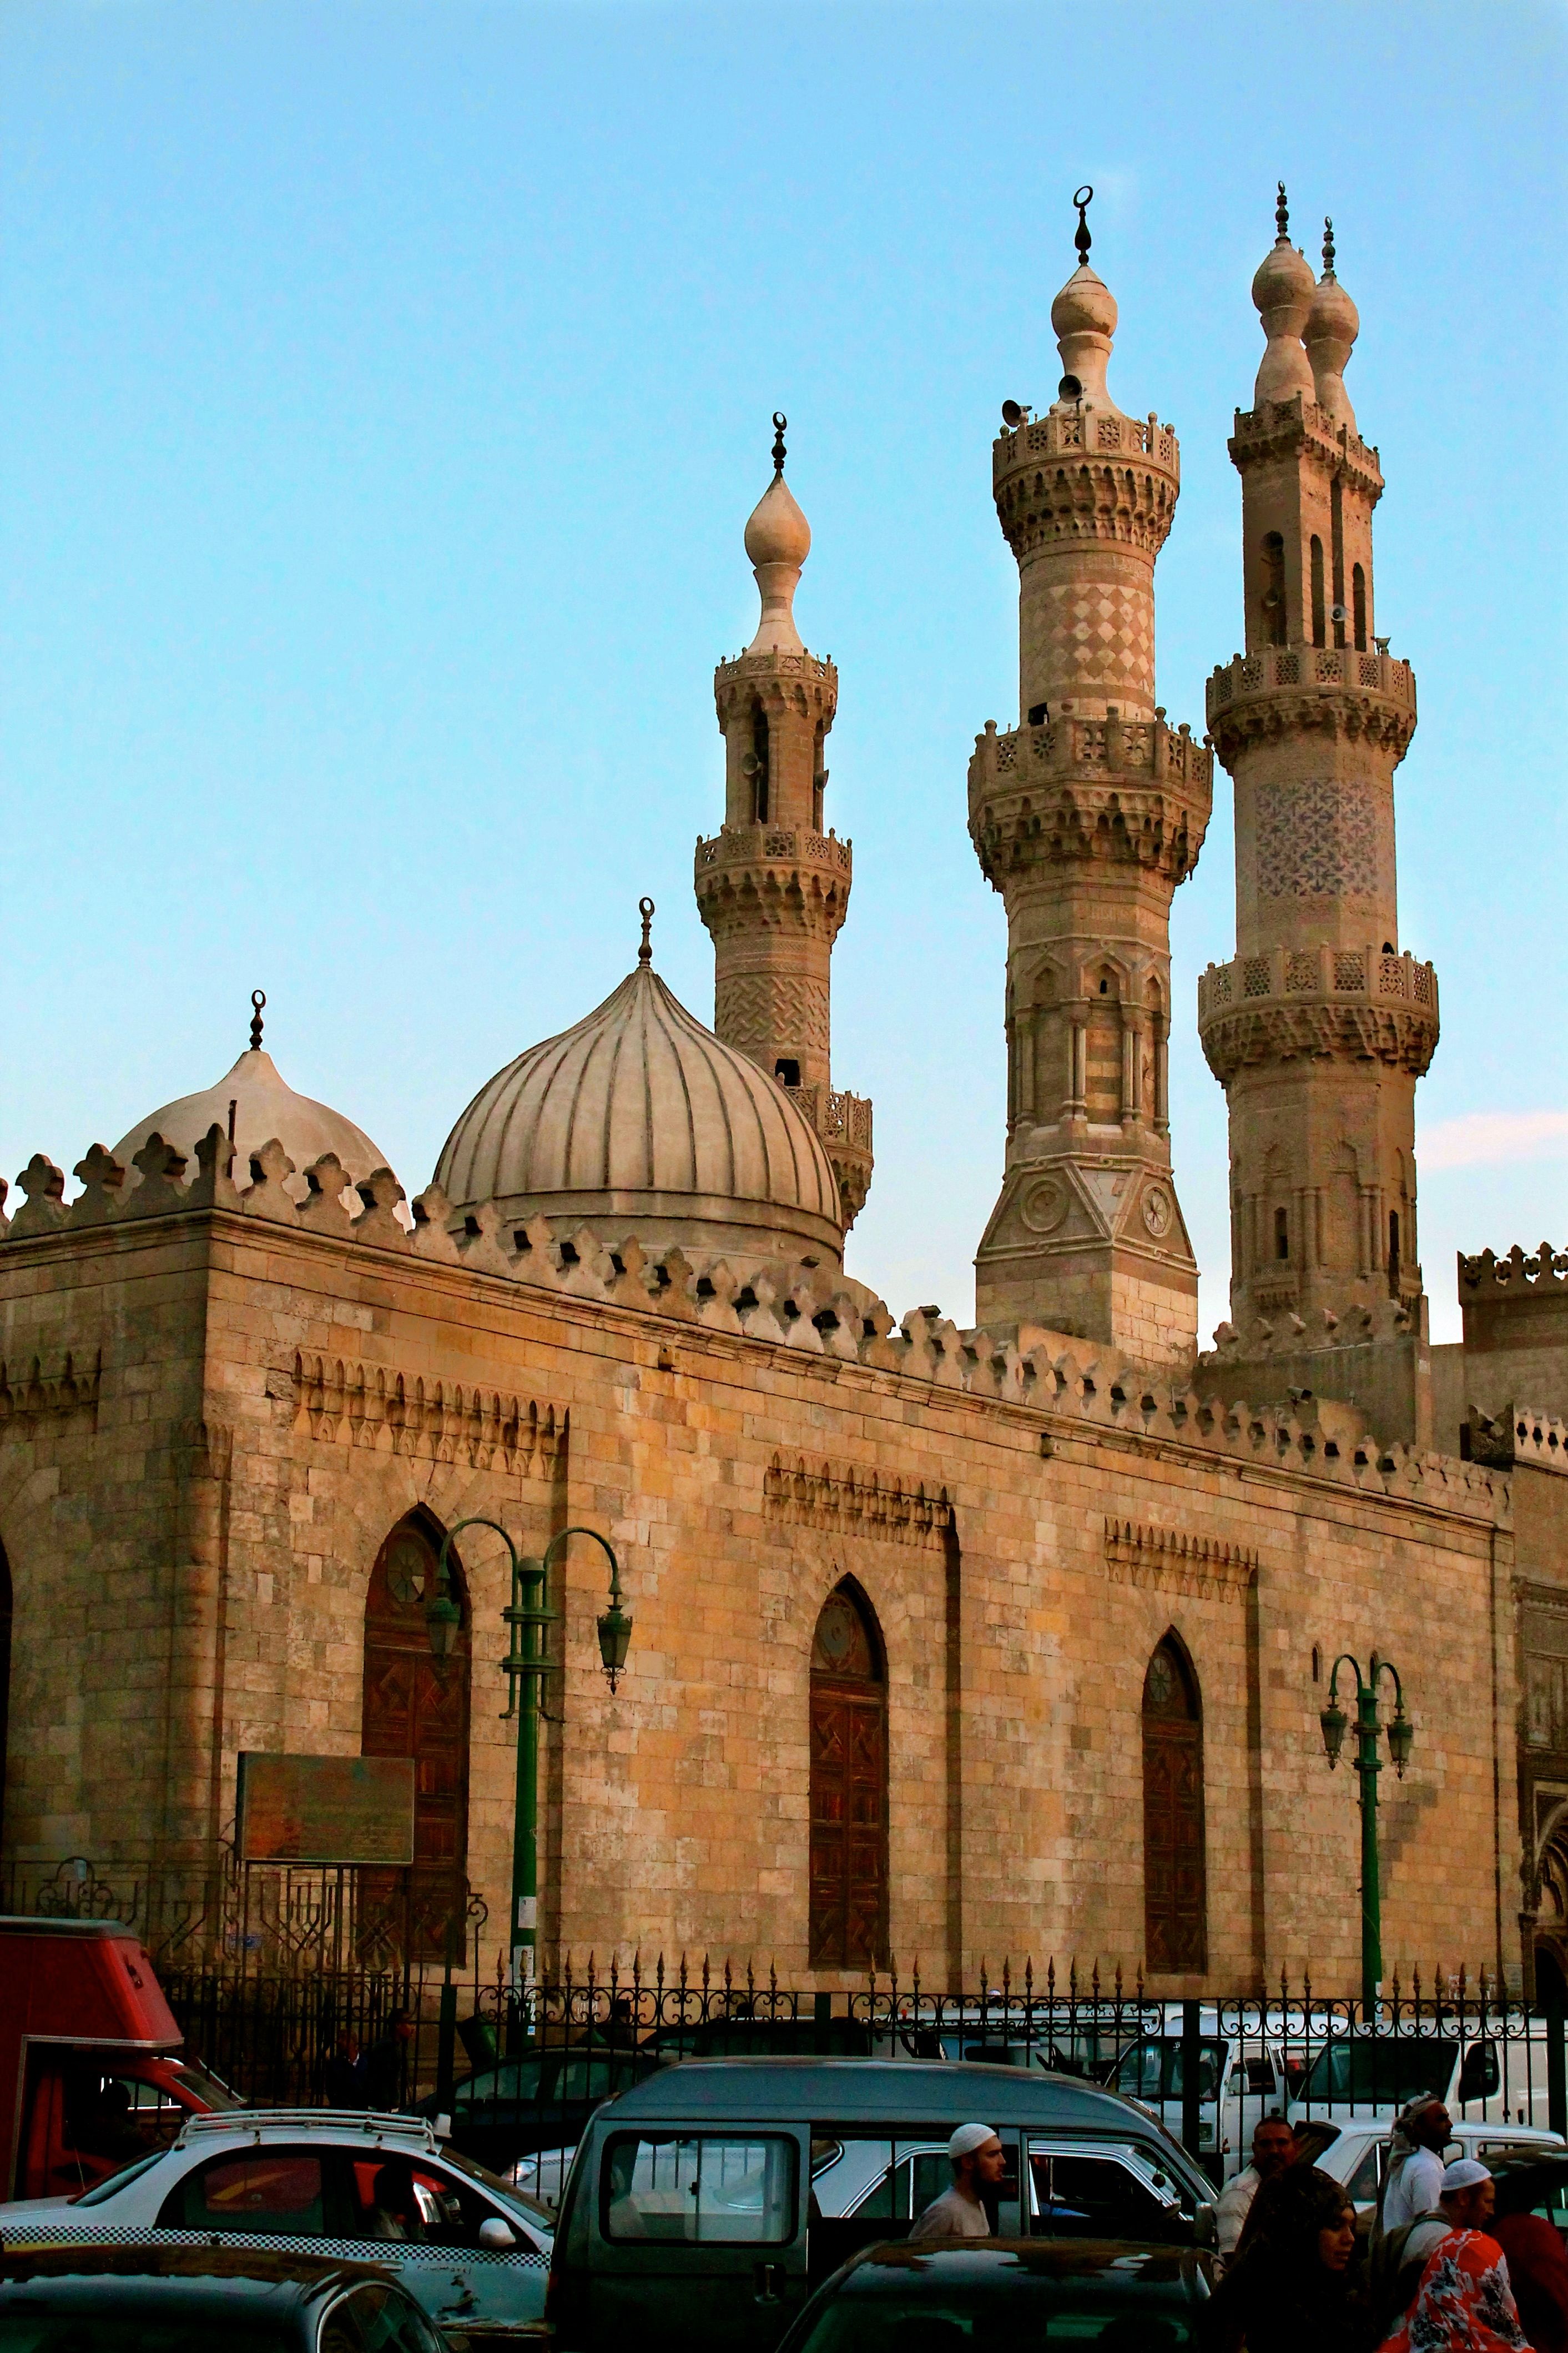 A side view of the front gate of Al Azhar mosque. Image courtesy of Wikimedia Commons. Egypt, 2013.